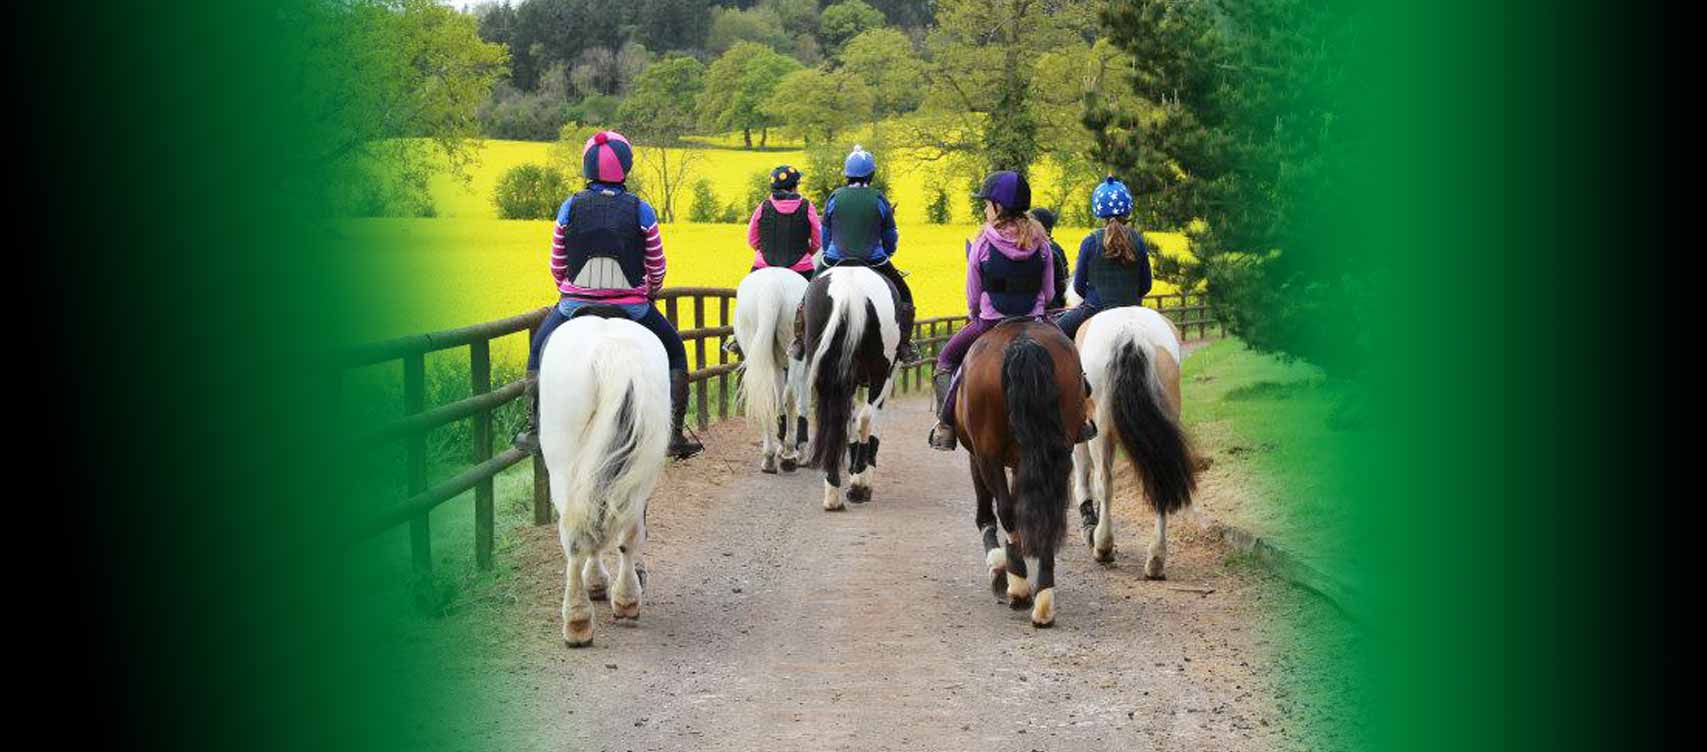 Our aim is to offer your horse the finest choice as nature intended